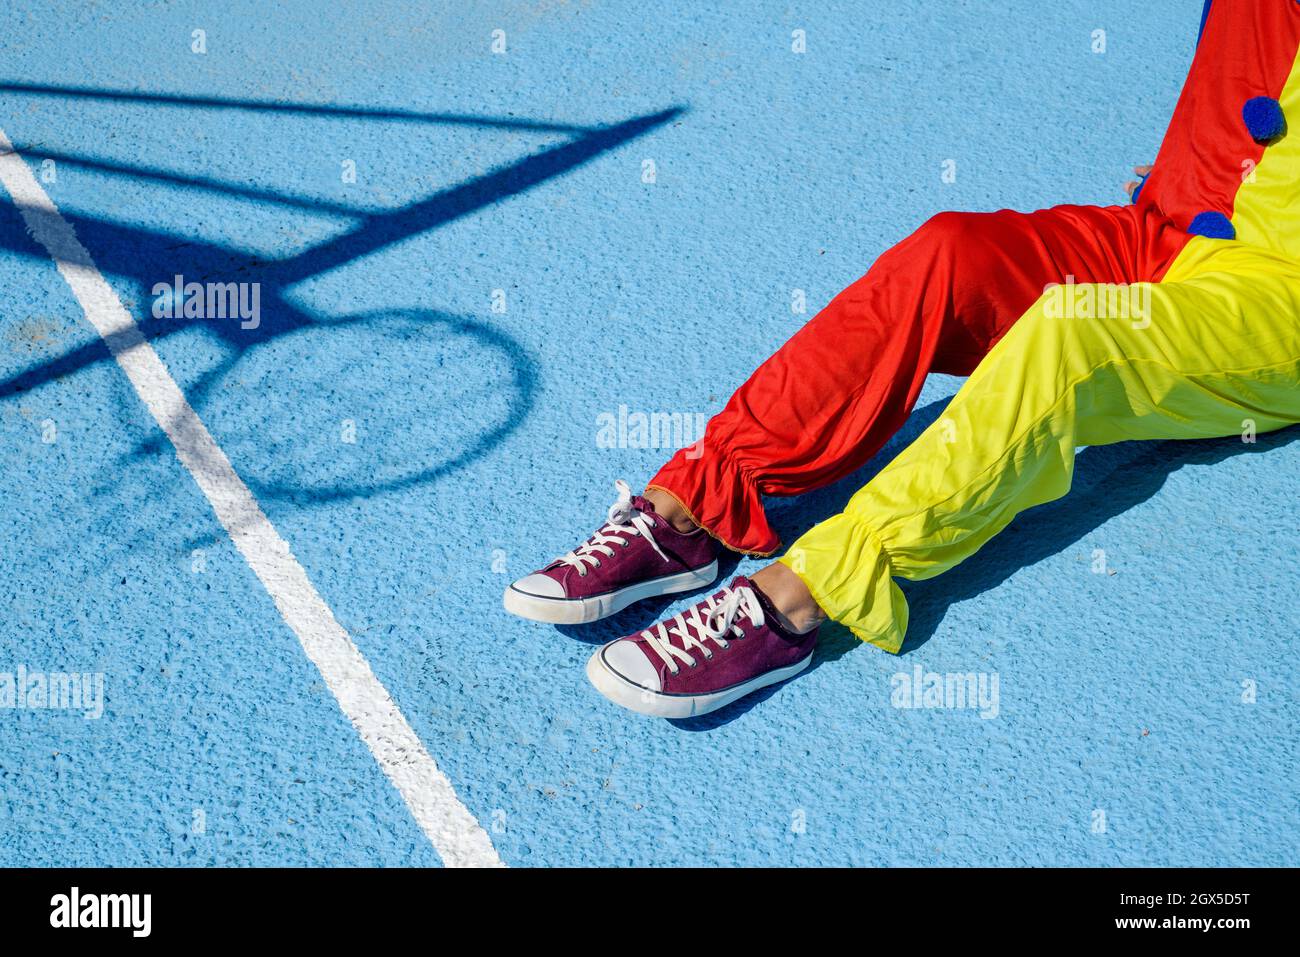 closeup of a man, wearing a colorful clown costume, sitting an outdoor basketball court Stock Photo